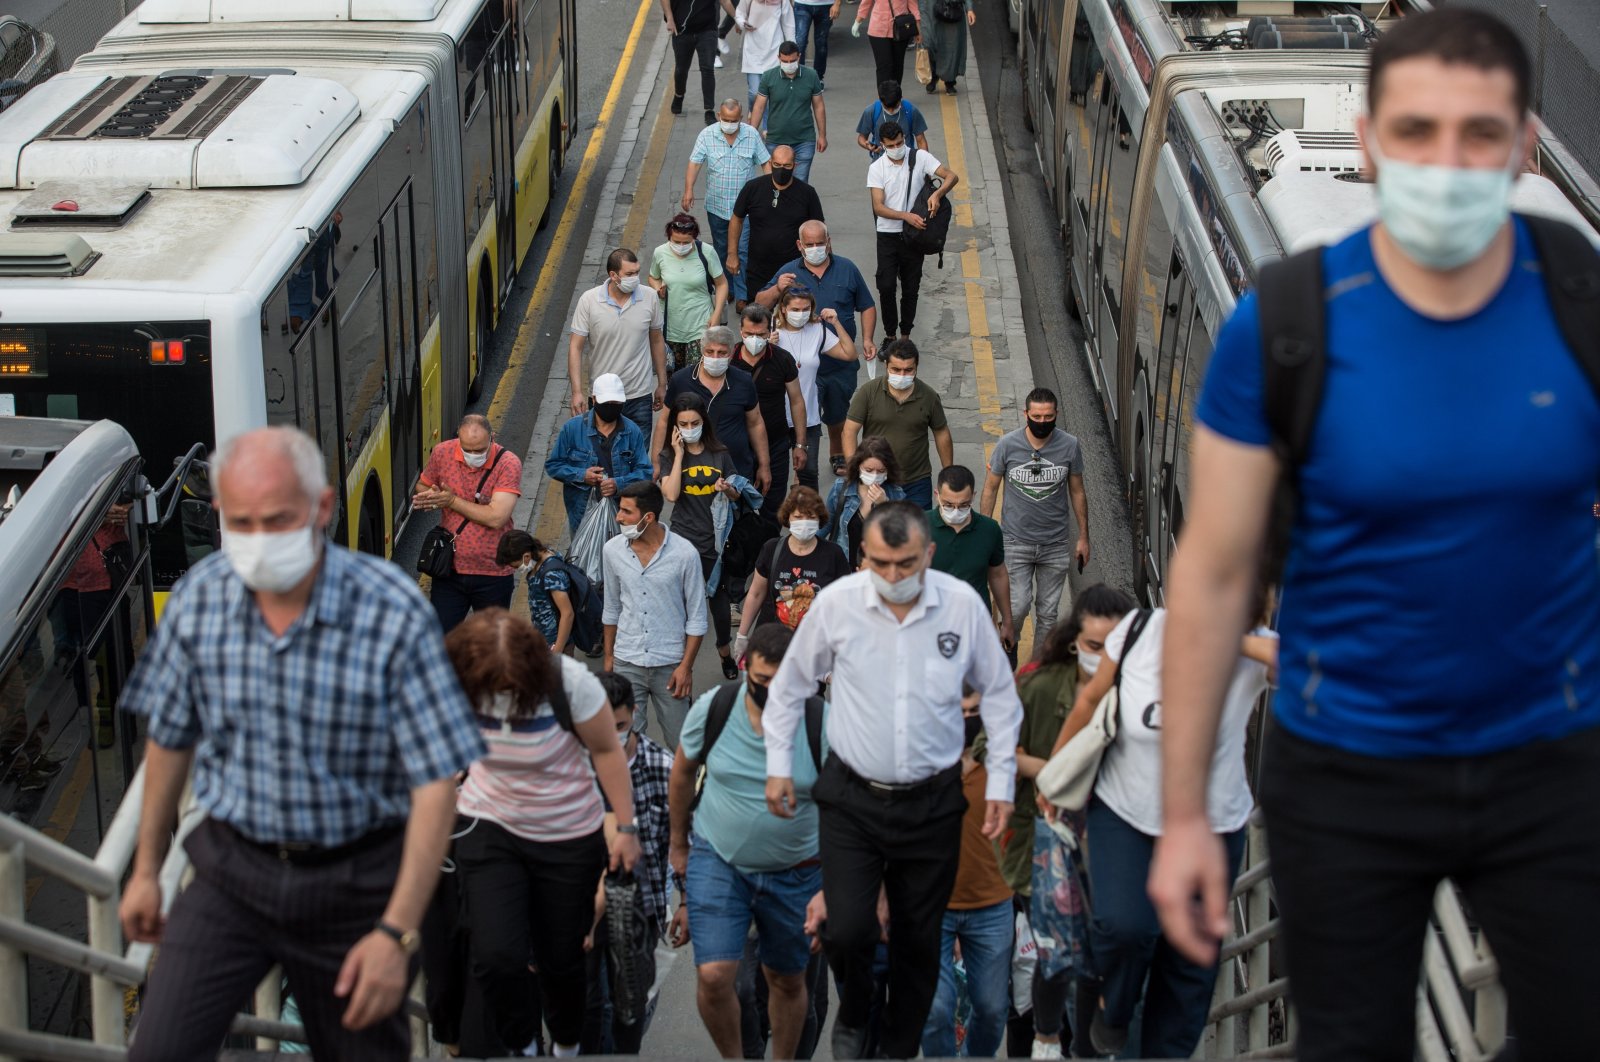 People leaving a Metrobus station in Istanbul, July 2020 (DHA Photo)